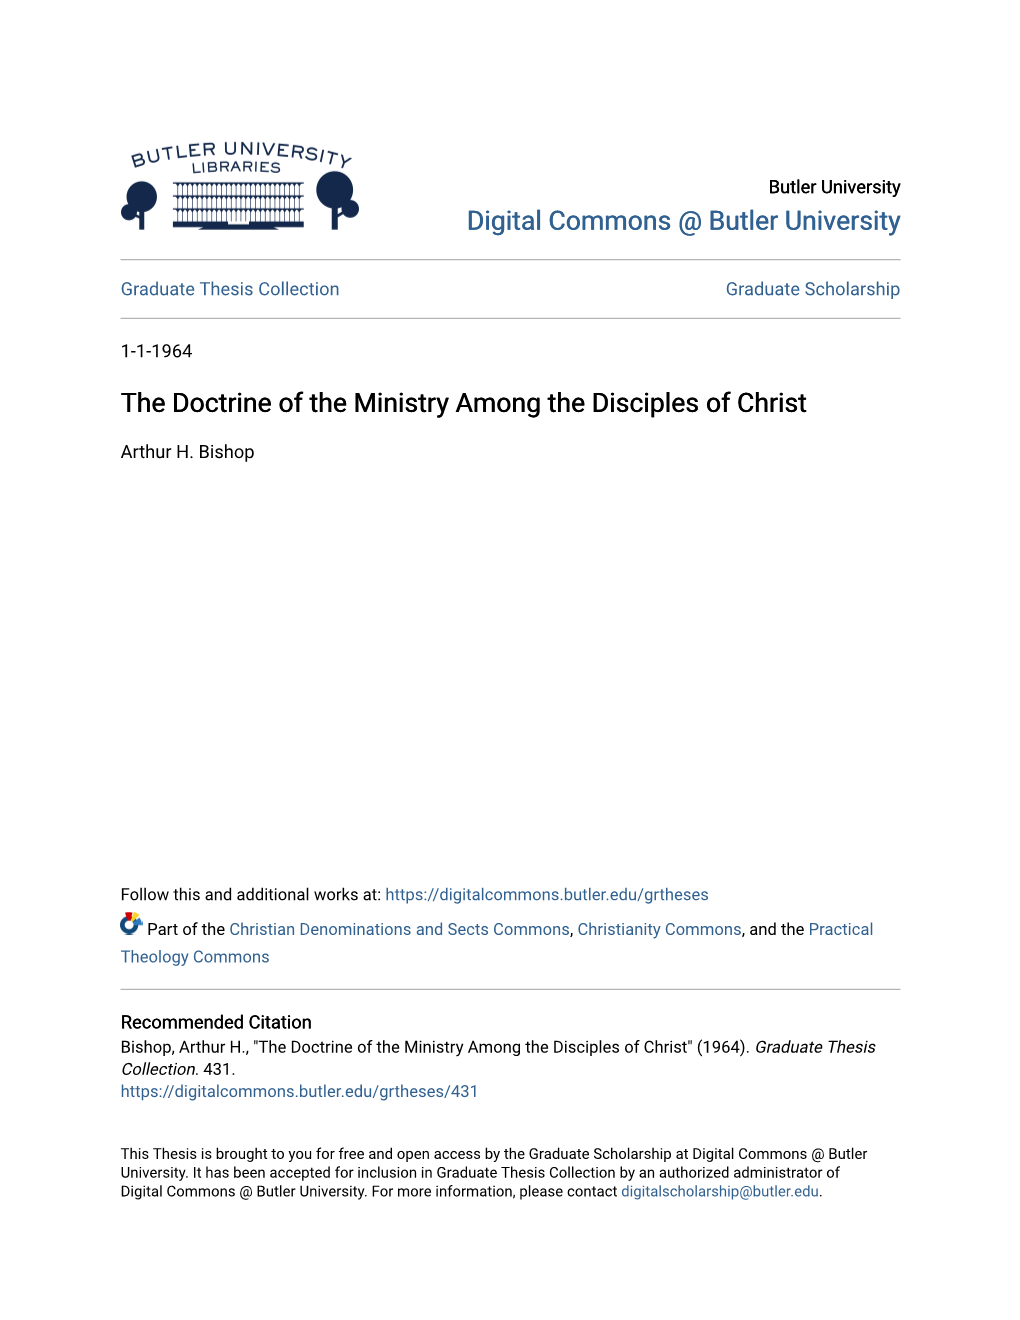 The Doctrine of the Ministry Among the Disciples of Christ